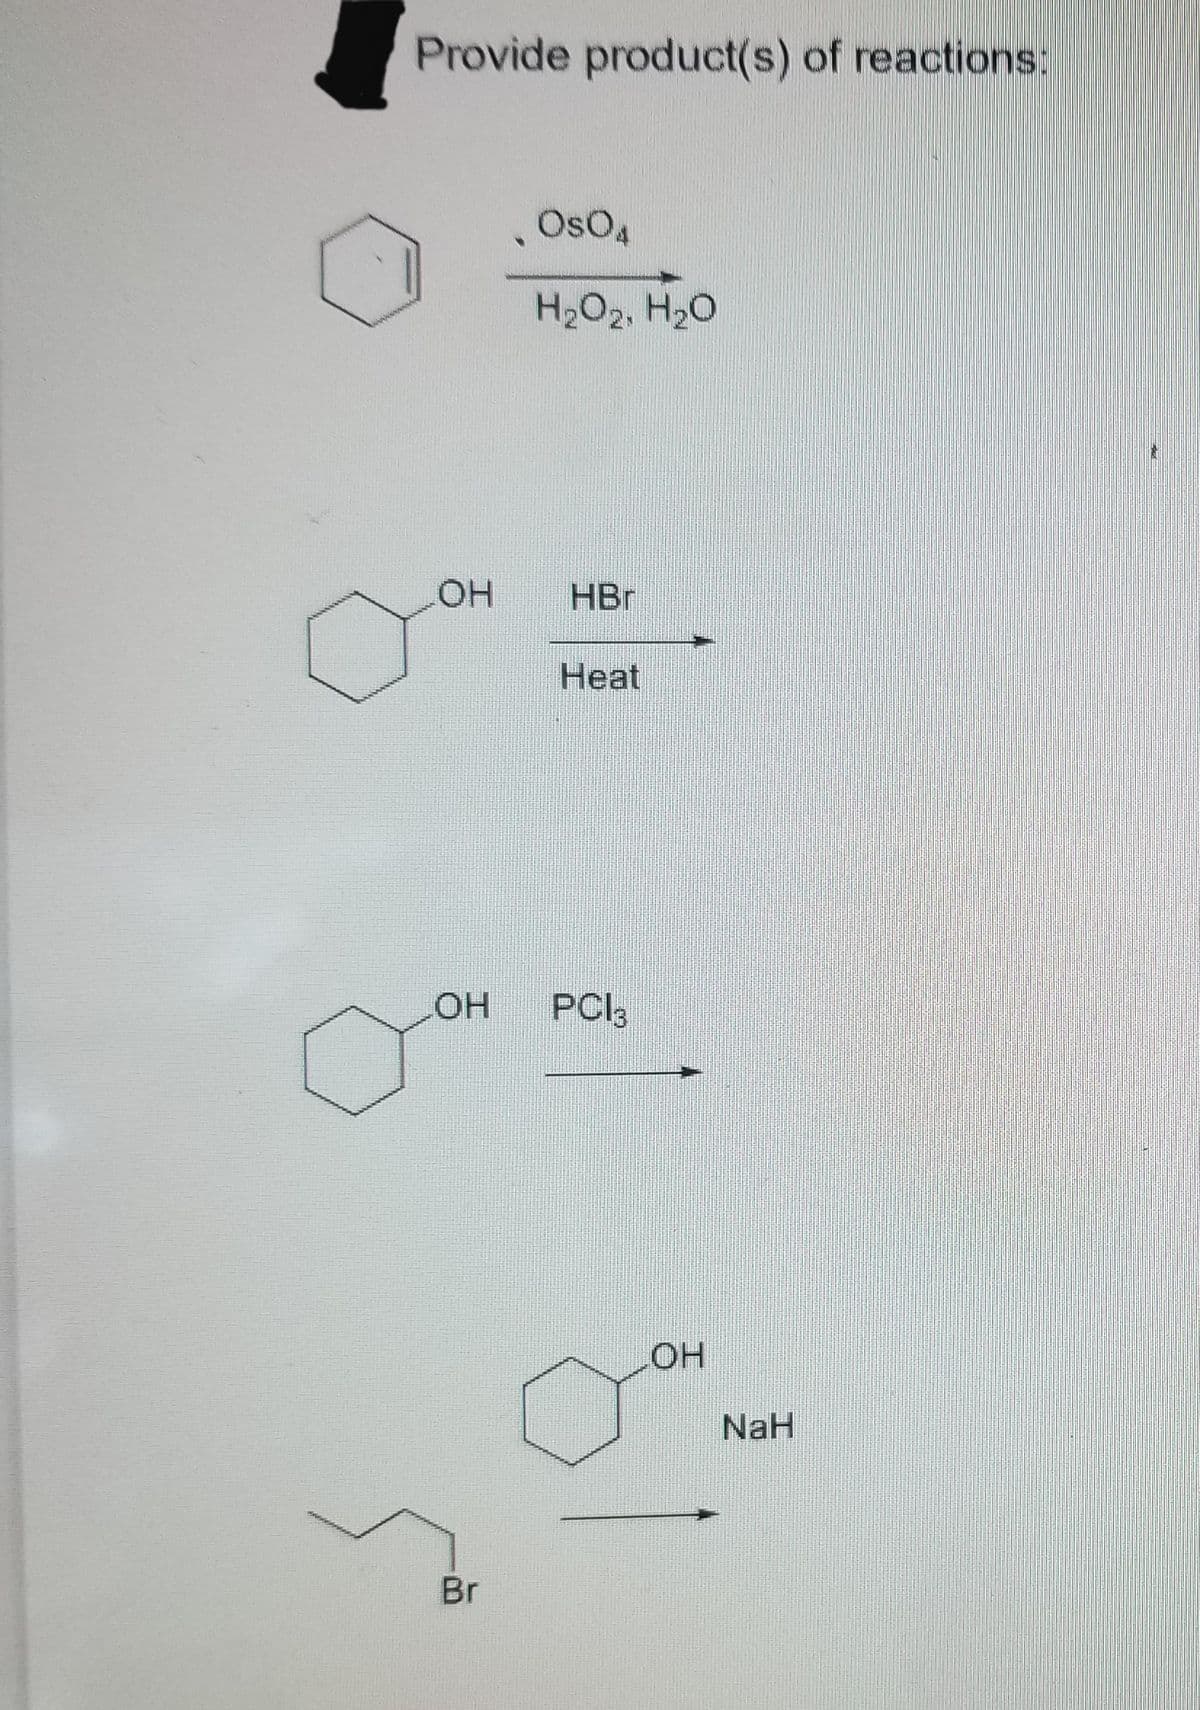 Provide product(s) of reactions:
OH
OH
Br
OSO4
H₂O2, H₂O
HBr
Heat
PC13
LOH
NaH